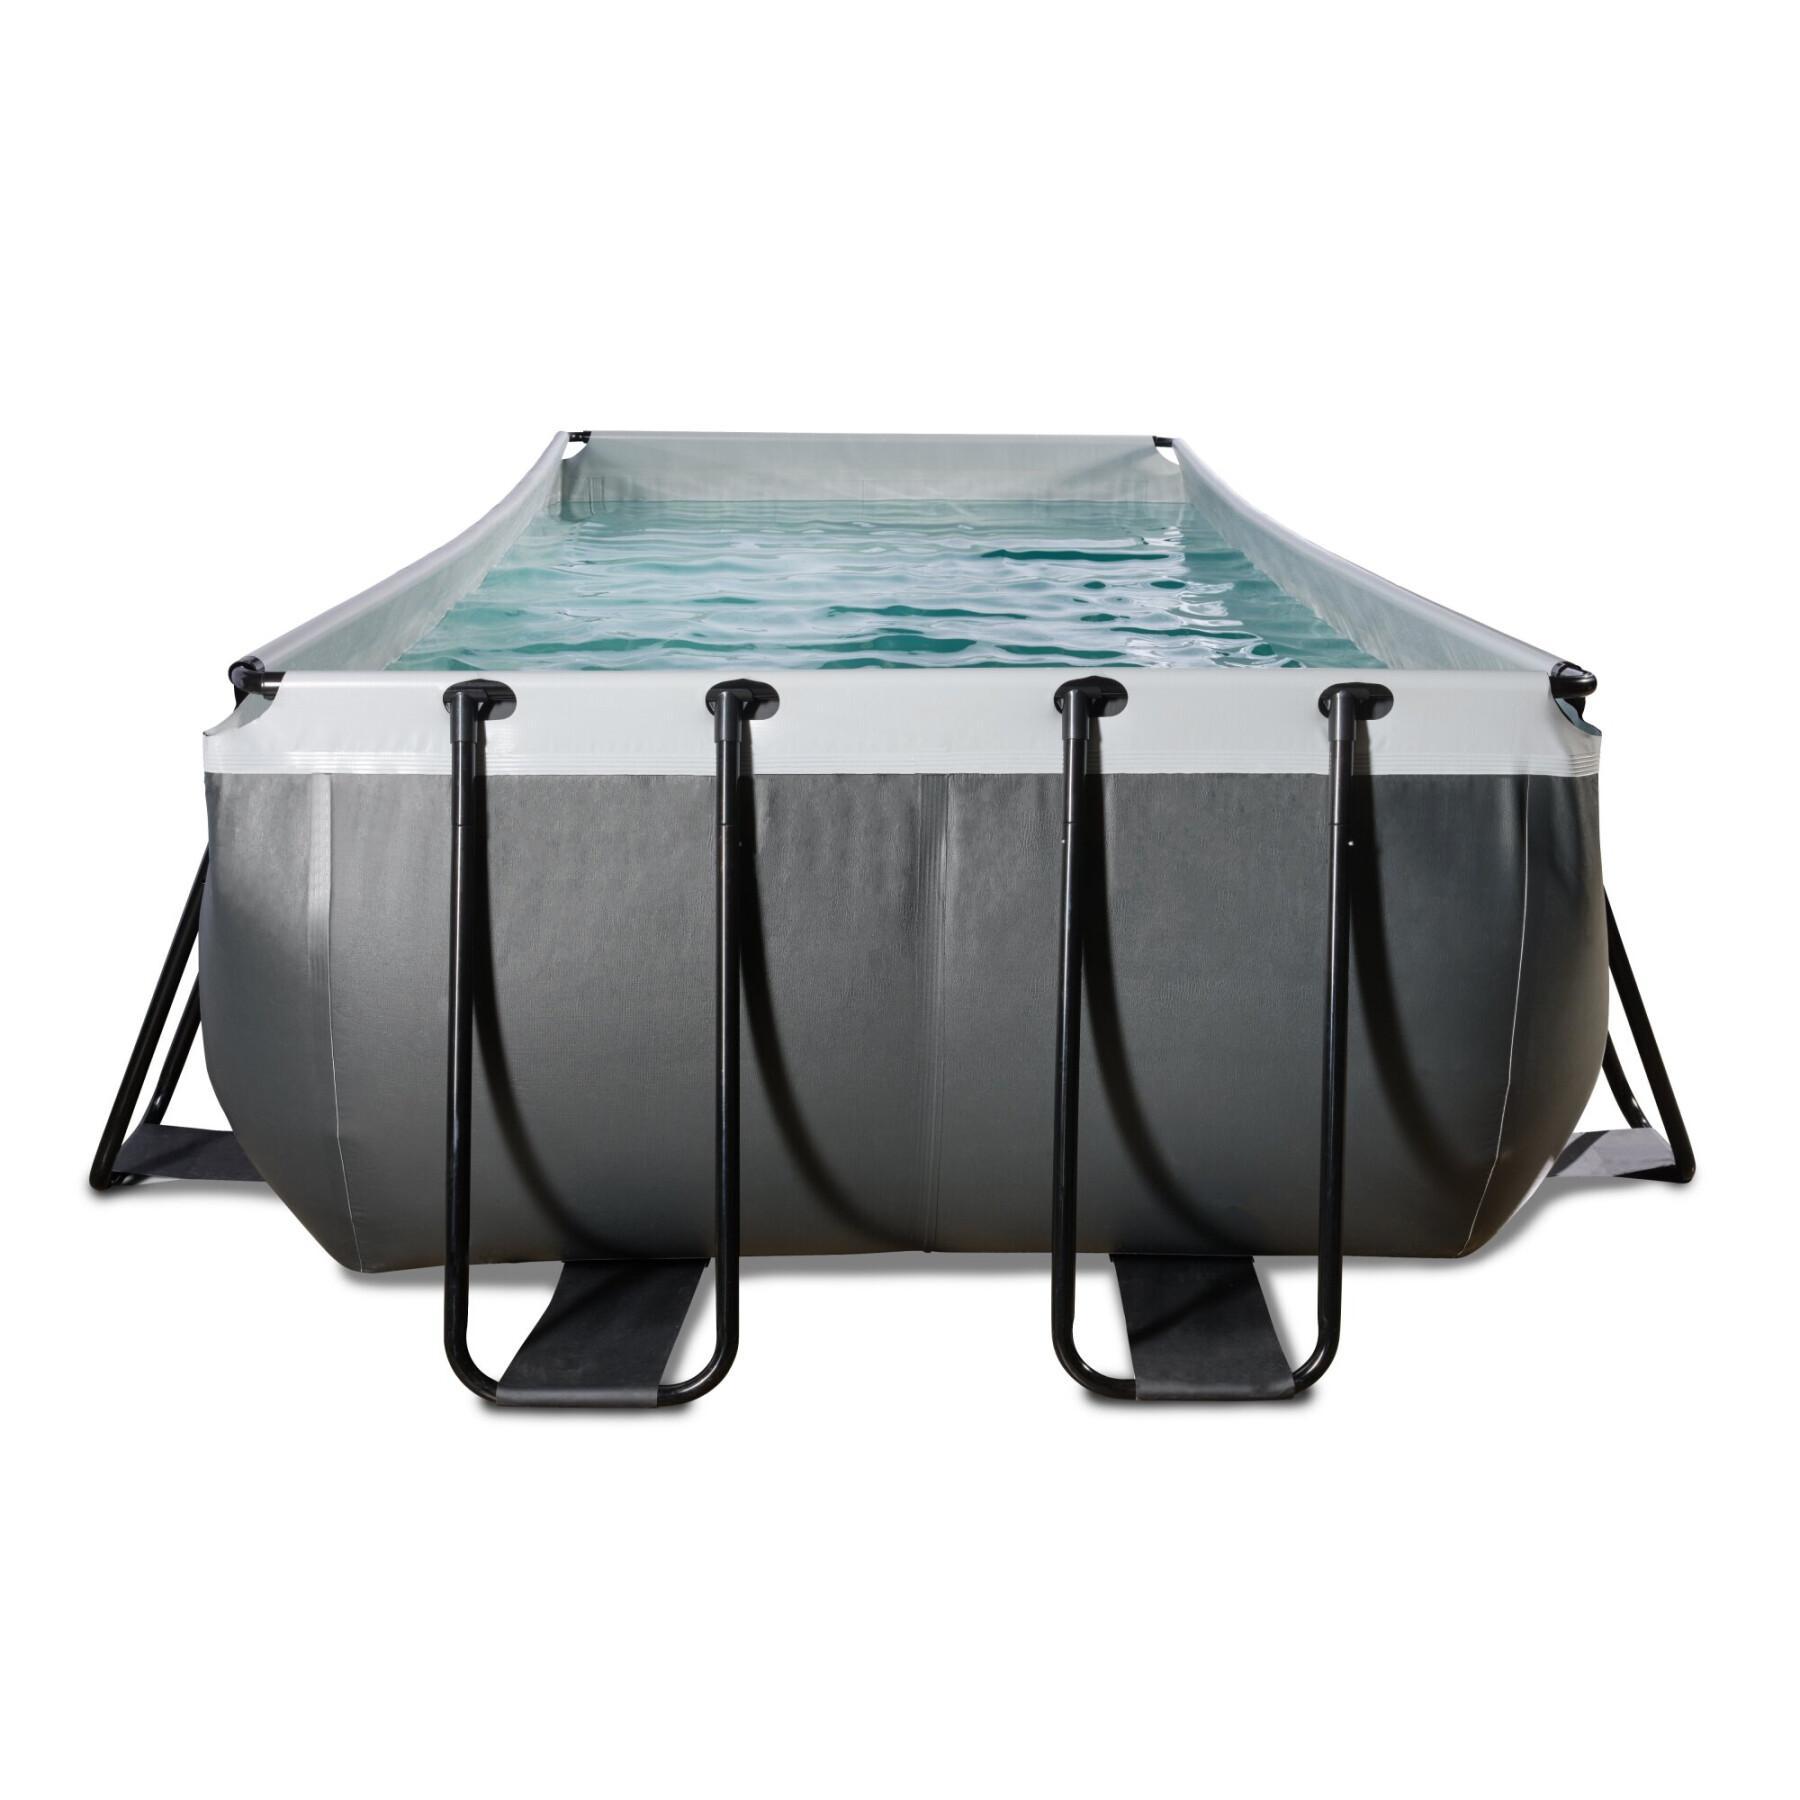 Swimming pool with filter pump in leather for children Exit Toys 540 x 250 x 122 cm